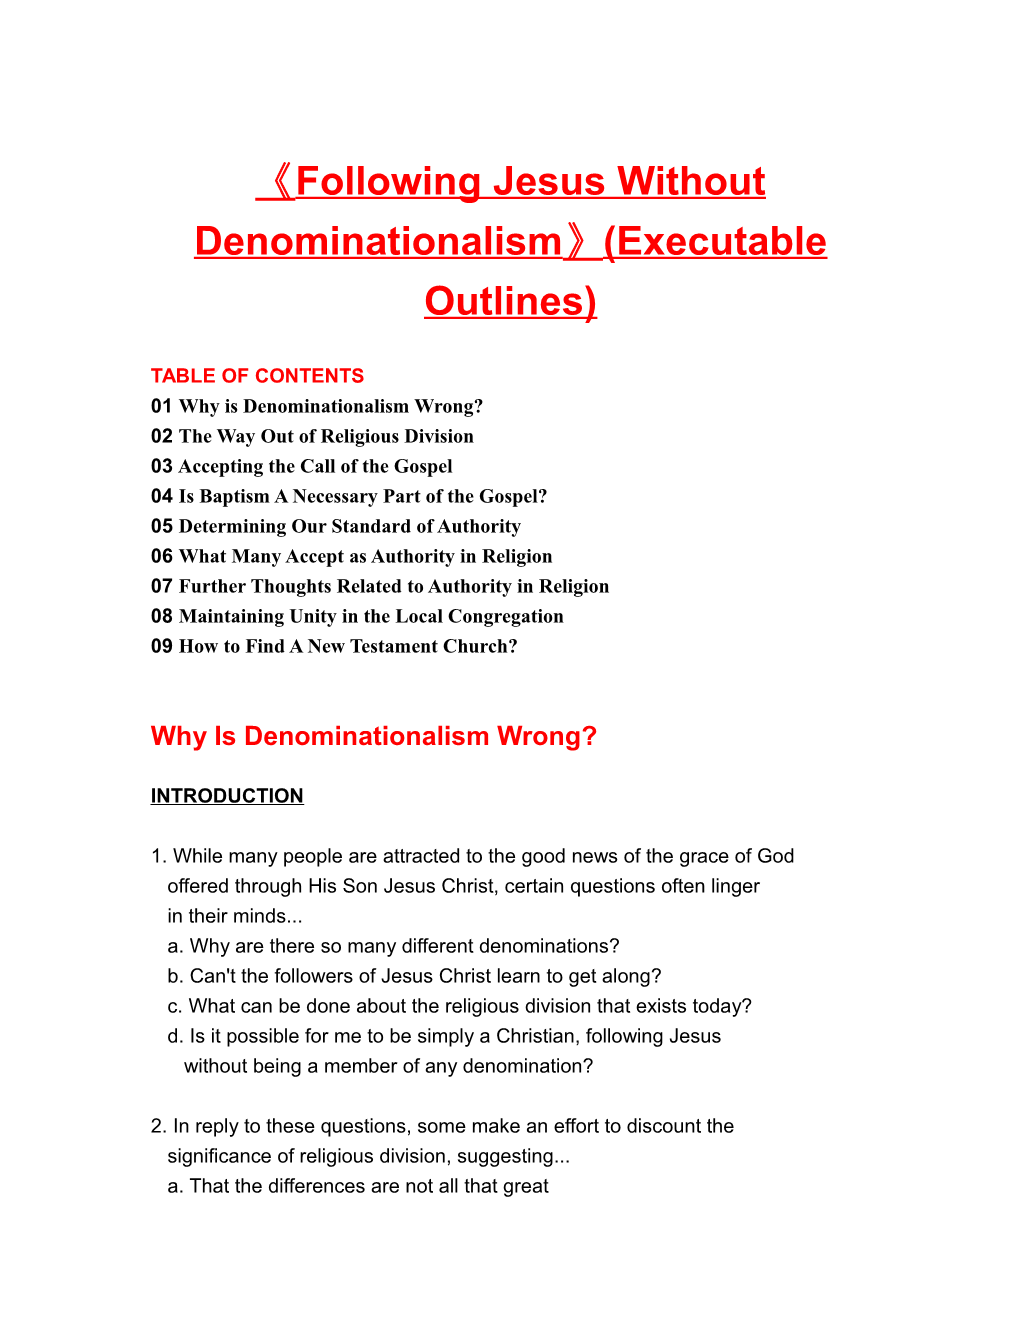 Following Jesus Without Denominationalism (Executable Outlines)